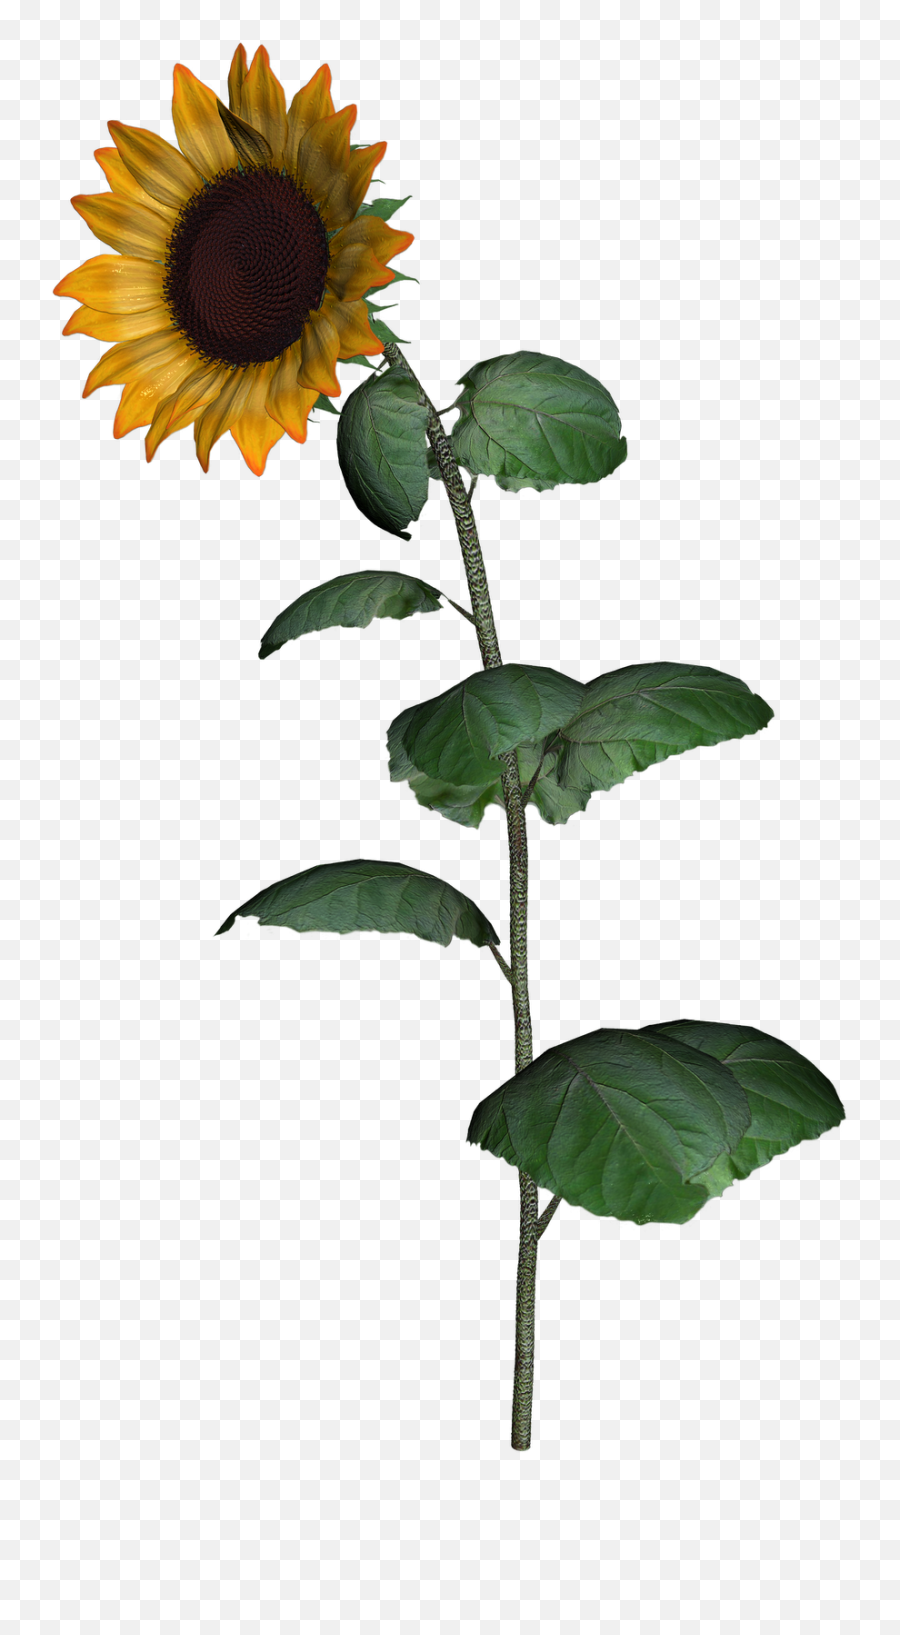 Sunflower Clipart With Leaf Png Images Transparent Png - Transparent Background Sunflower Img Emoji,Sunflower Emoji